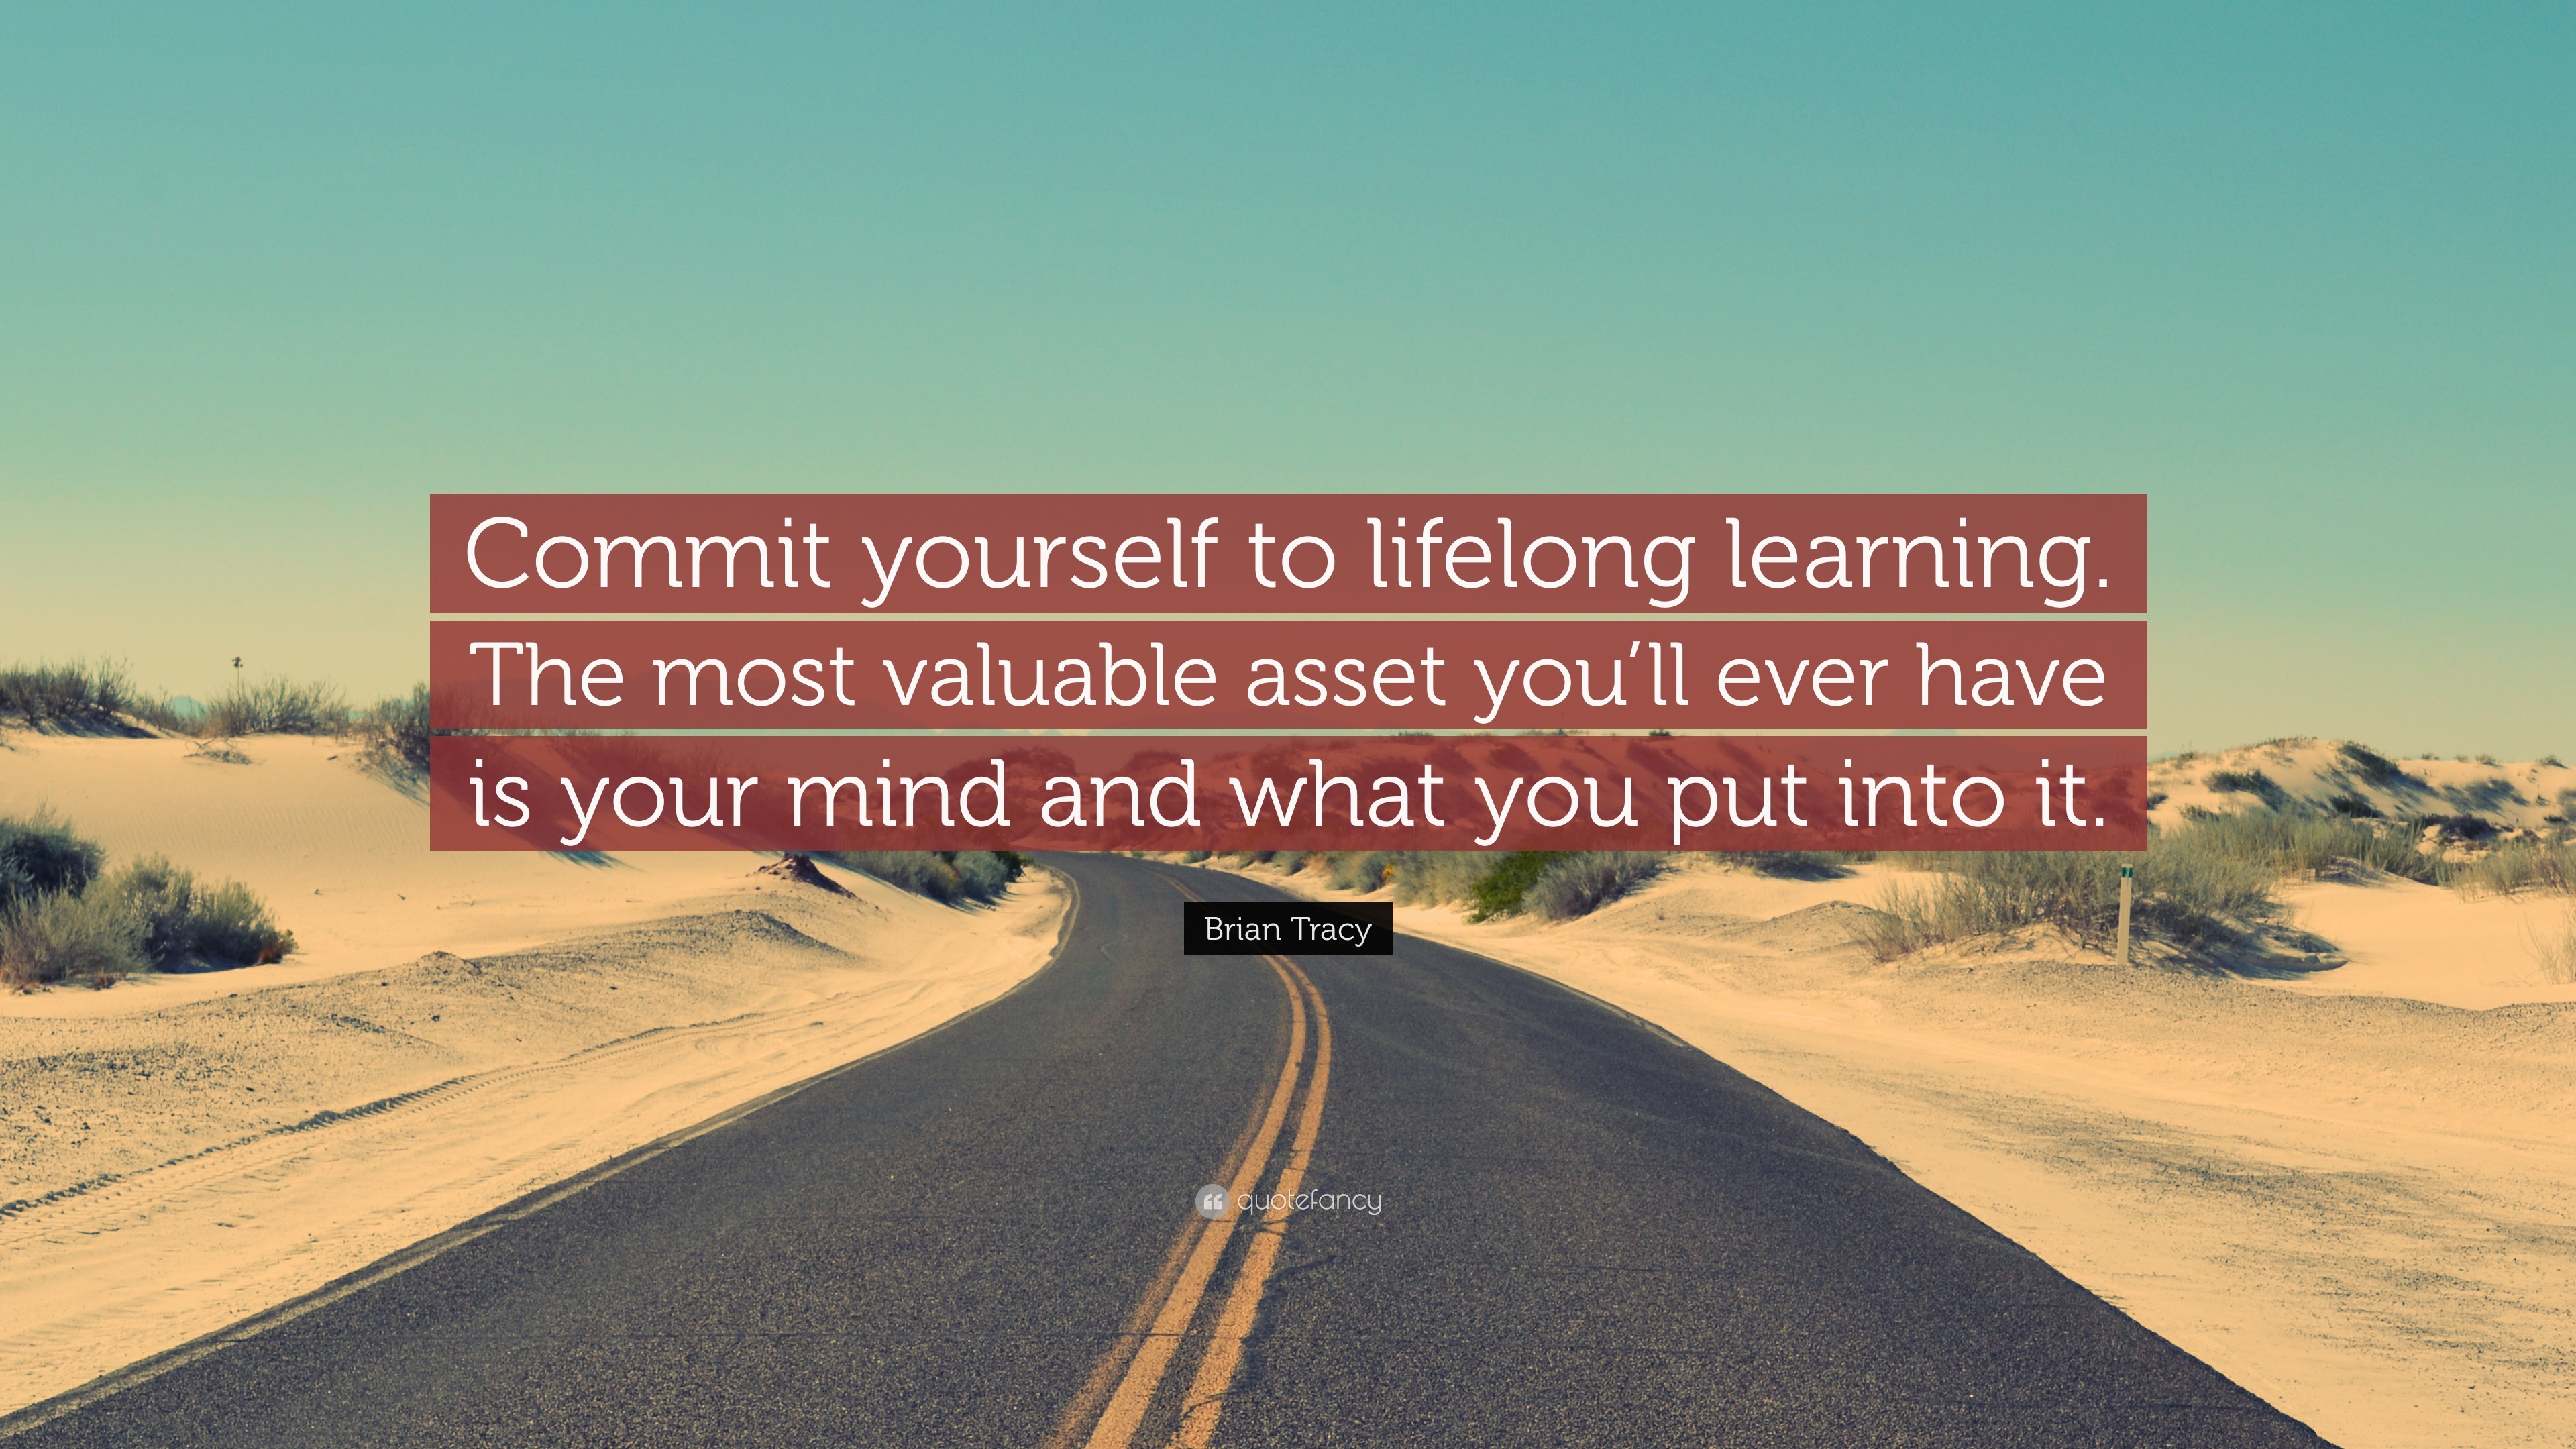 learning is a lifelong journey quotes